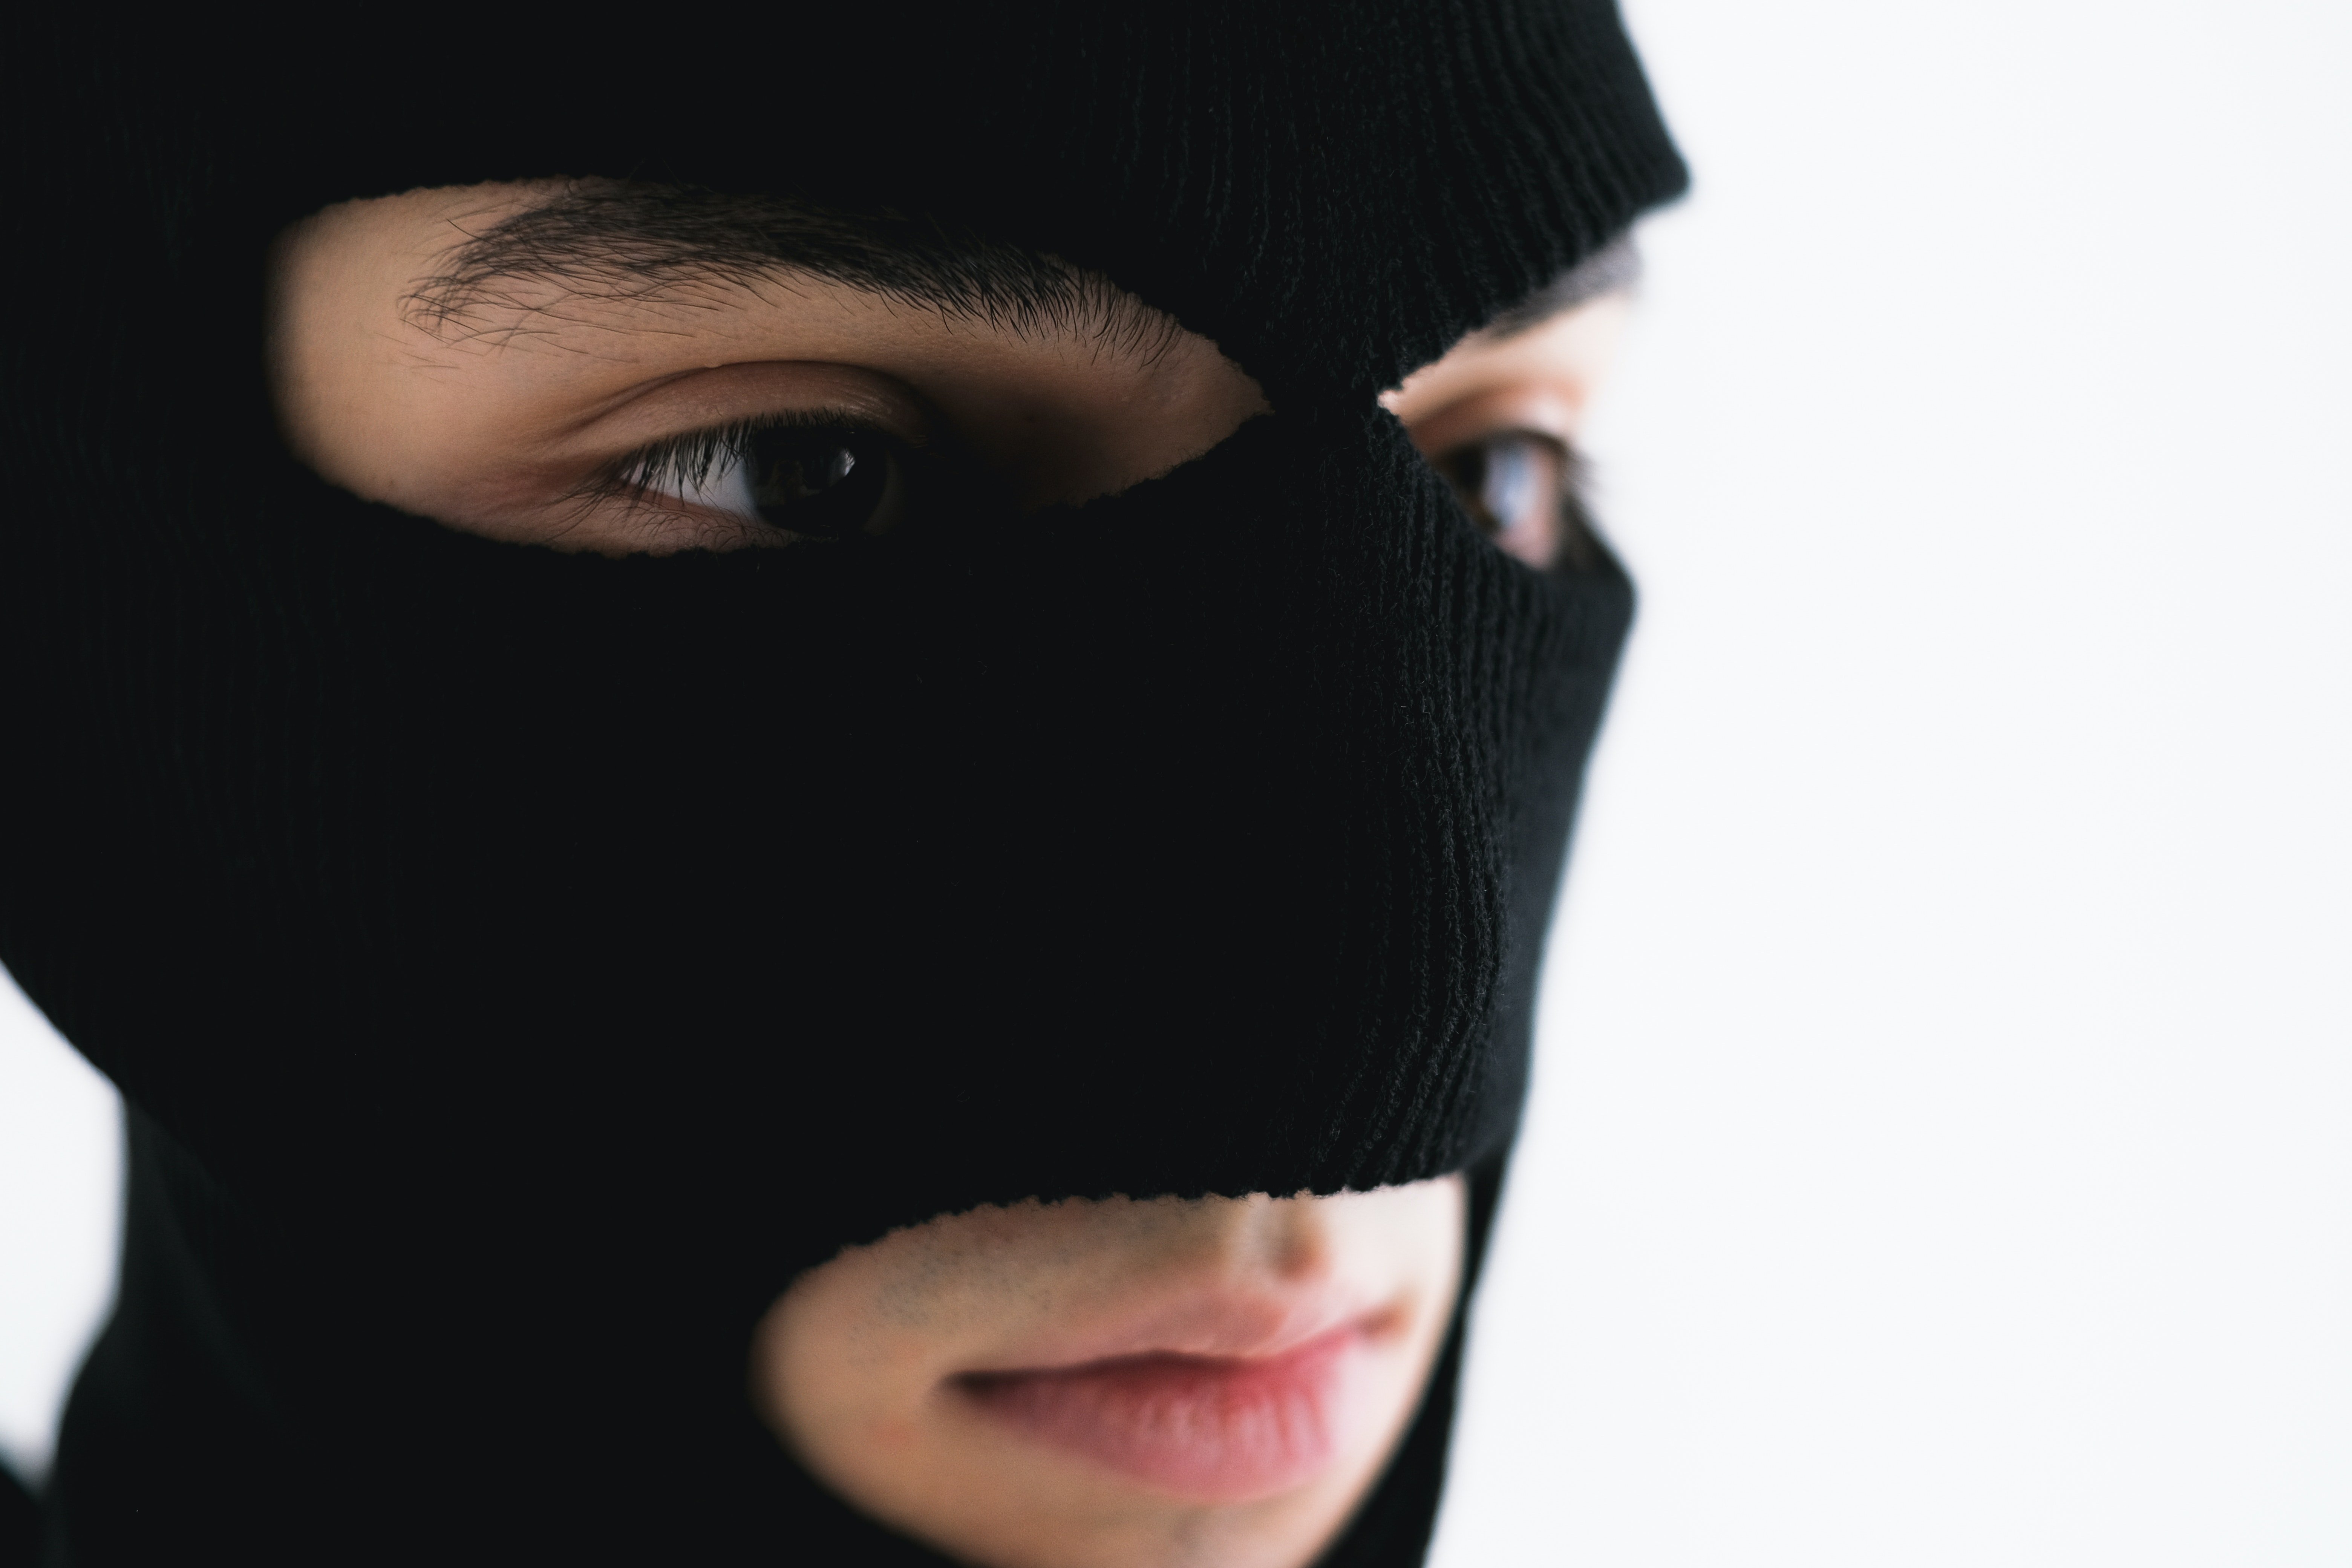 The old woman refused to go to the police station as she could not remember the robber's face. | Source: Pexels